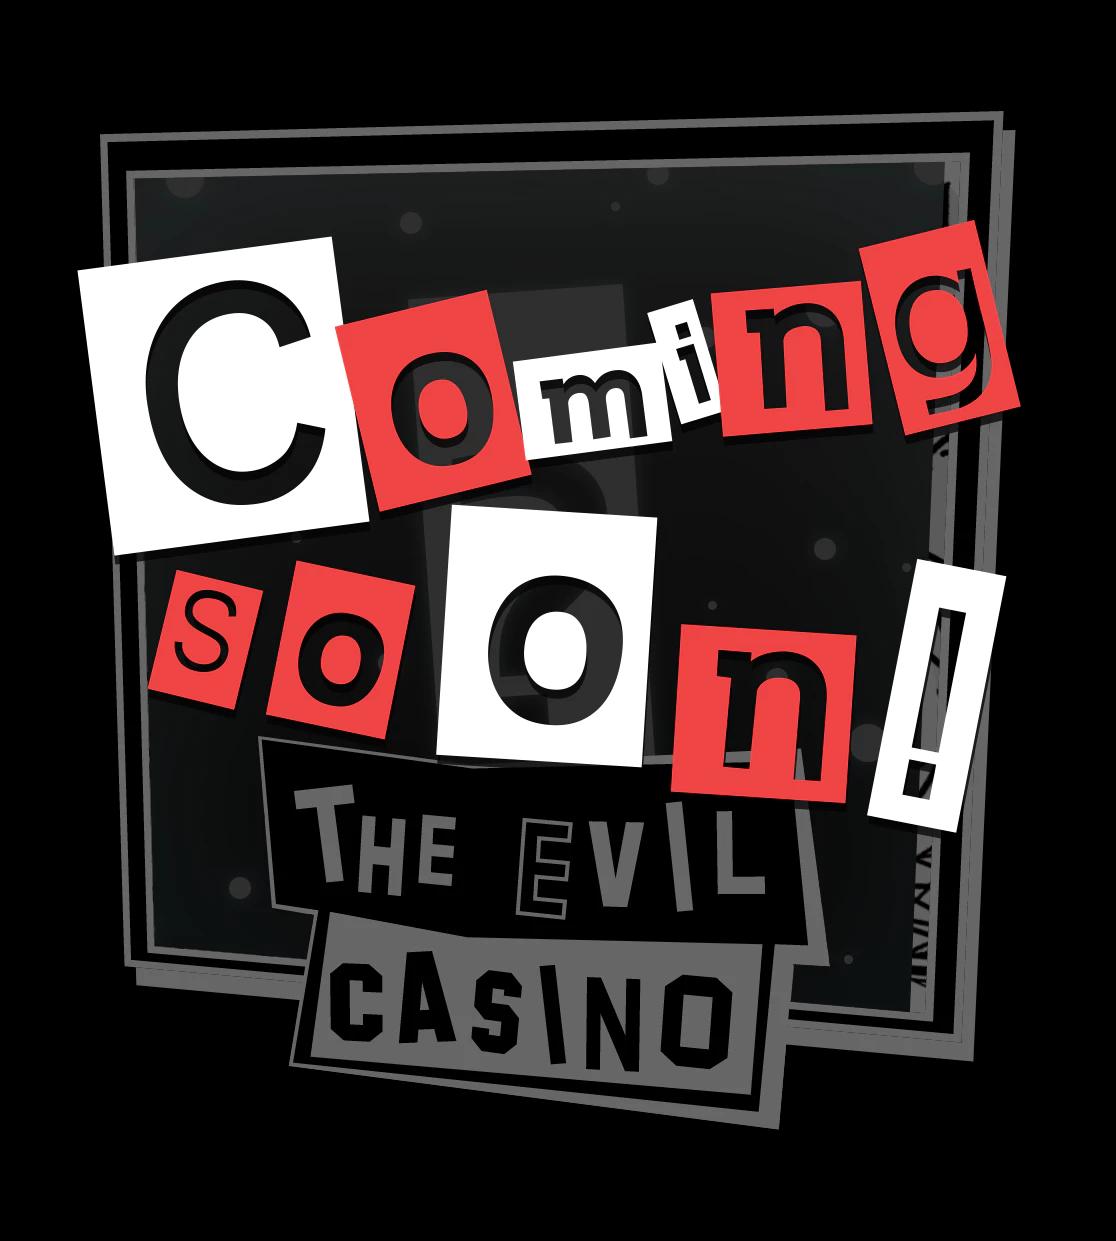 Coming Soon: The Evil Casino